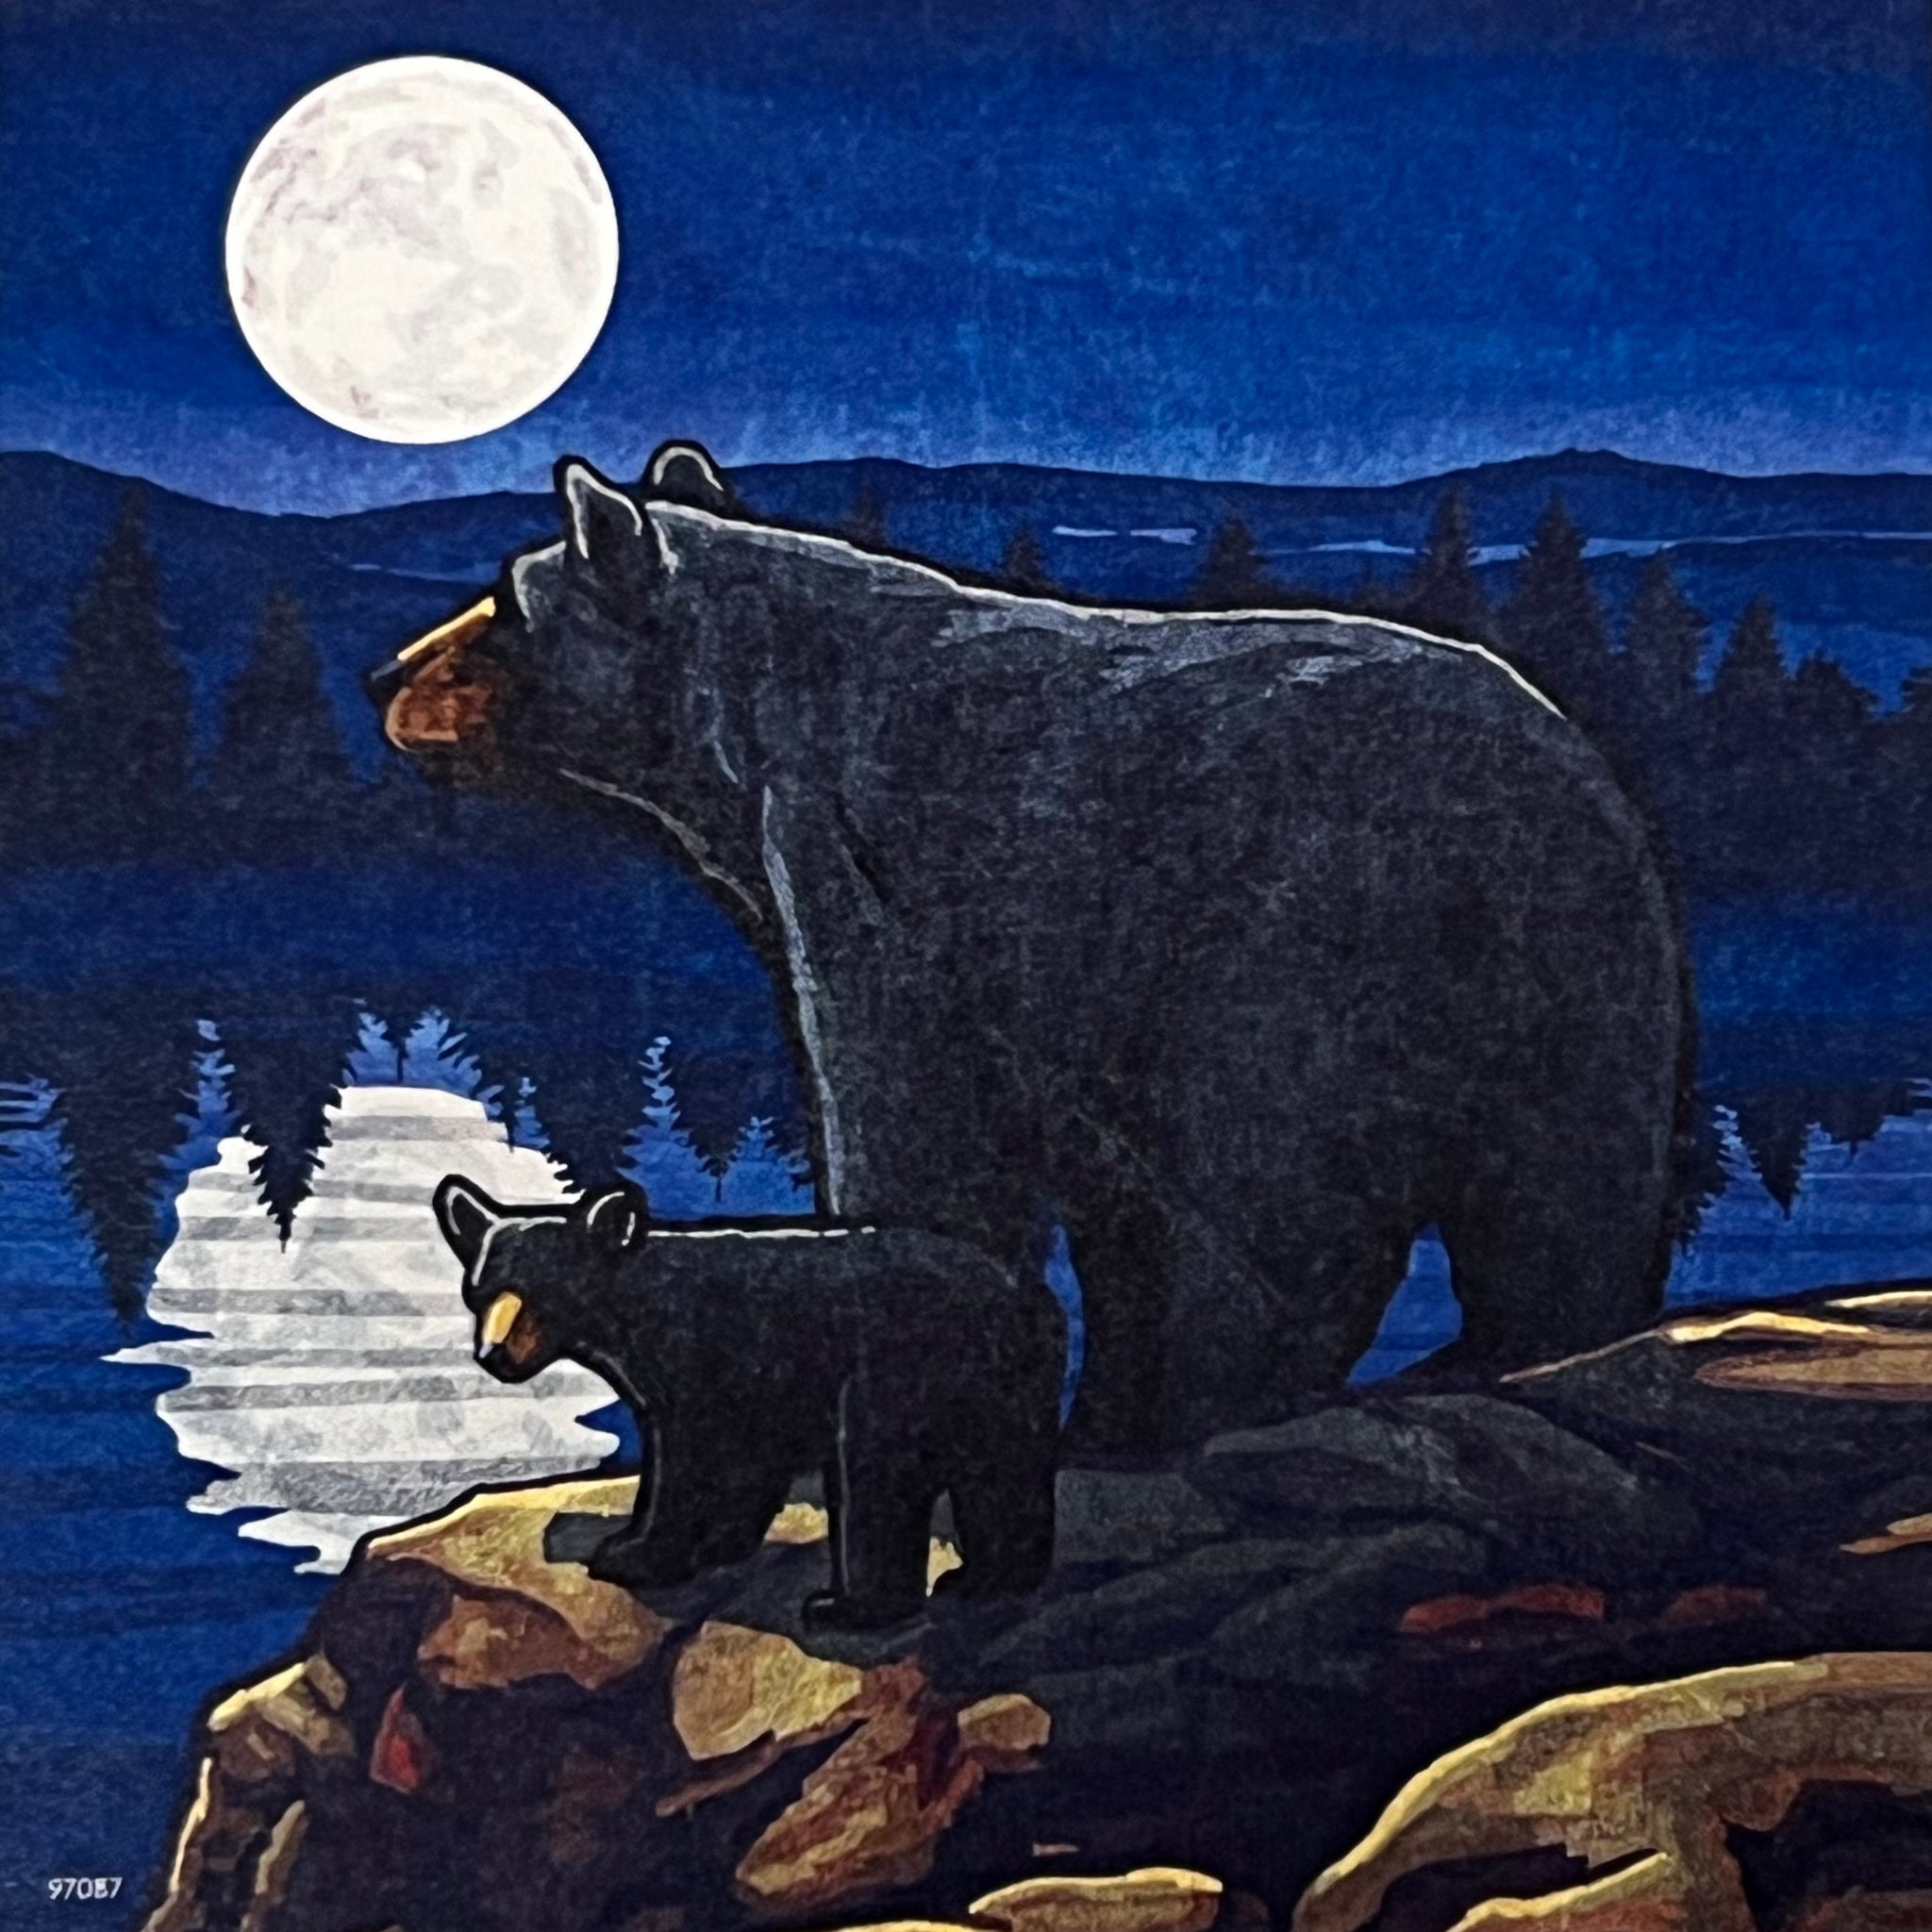 Bear and cub walking by water with full moon 